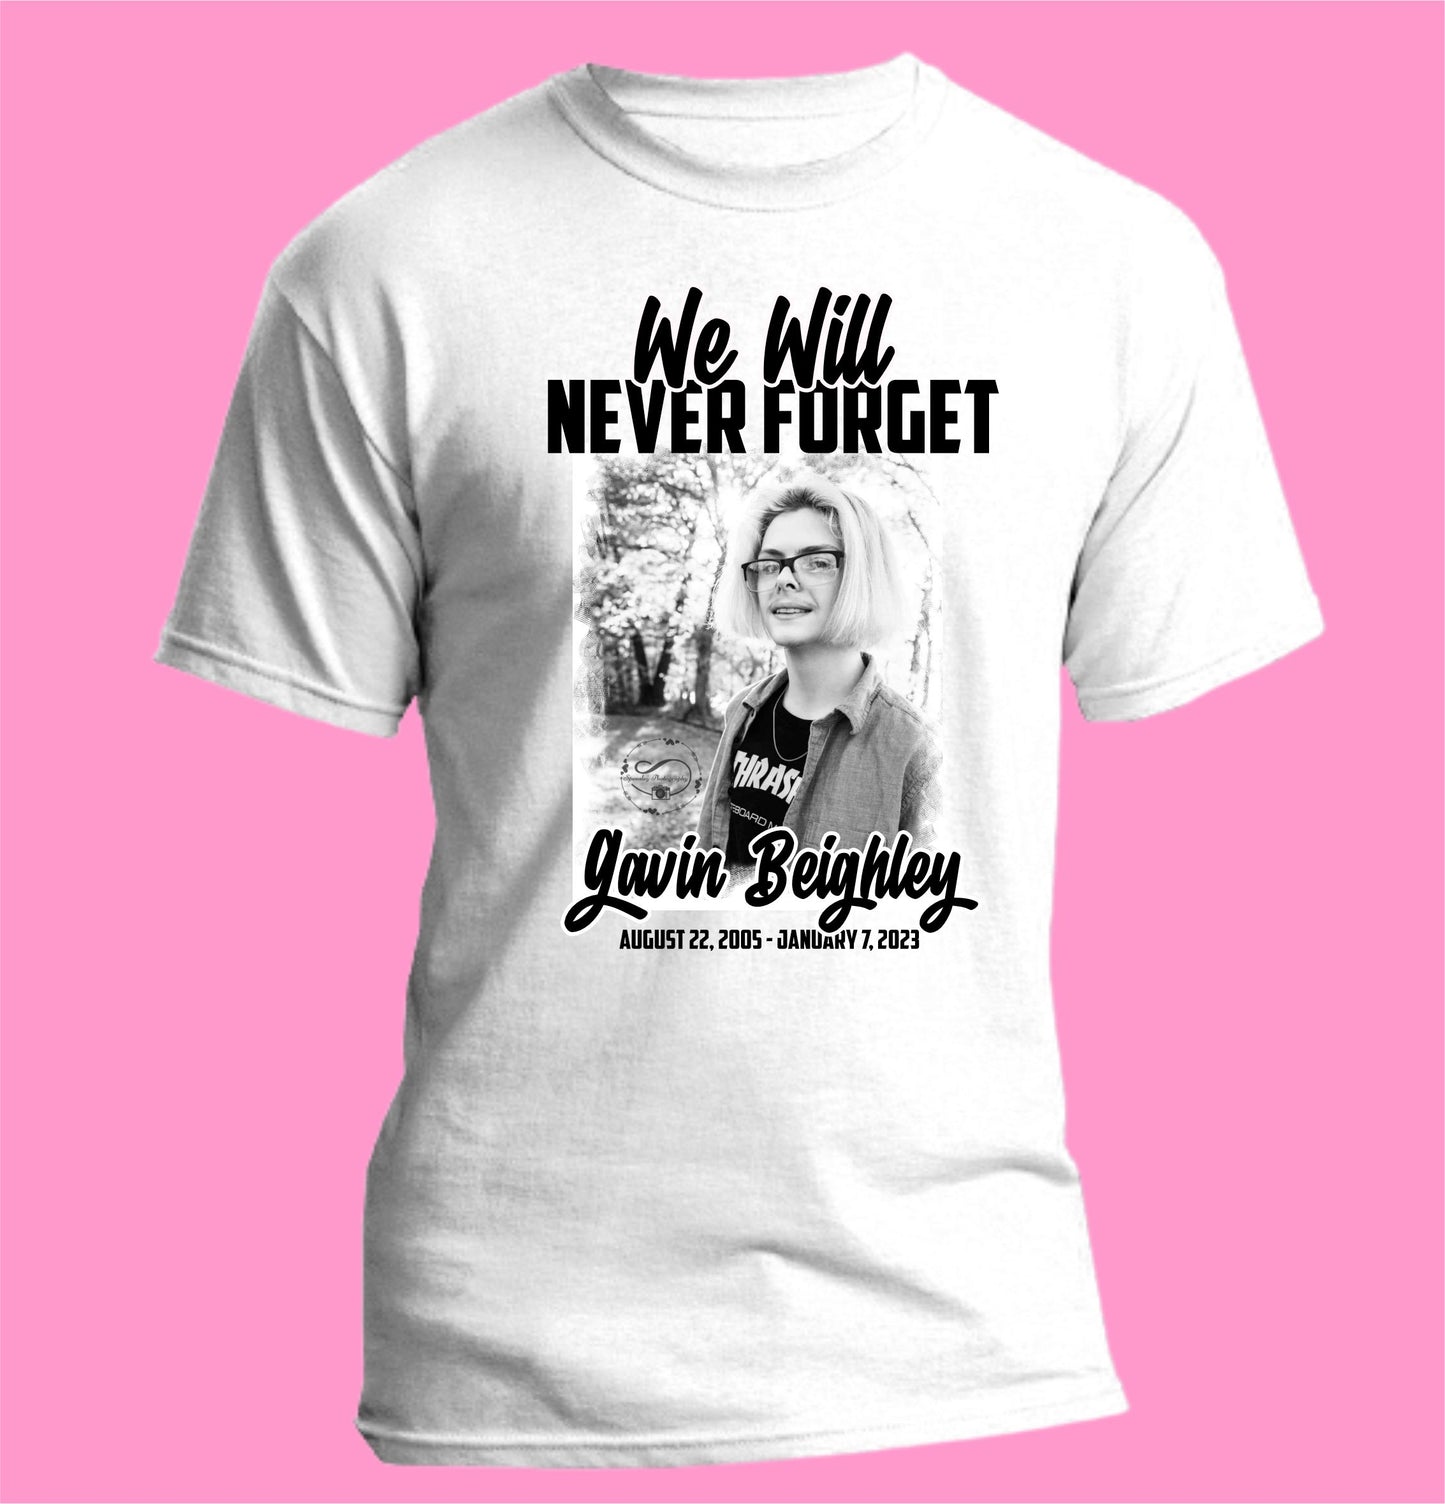 We Will Never Forget t shirt